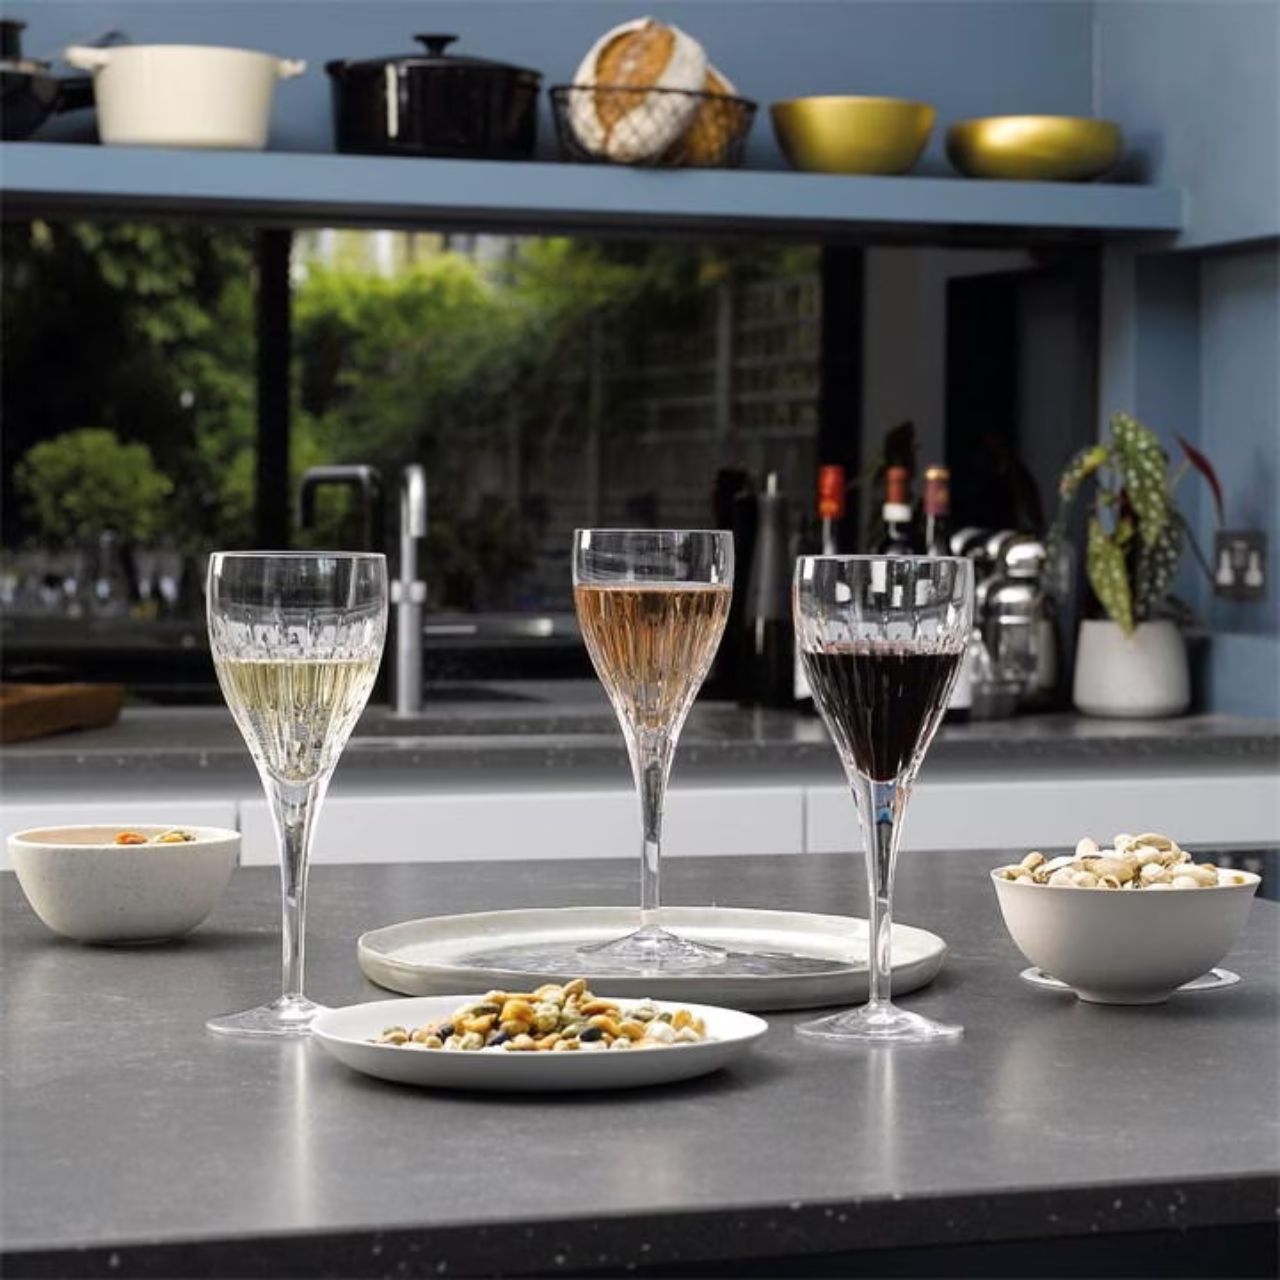 Whether the wine is a select vintage or just a favourite everyday choice, it always feels special when served in a Waterford glass. The set of six Mara wine glasses provide the perfect modern design, created by Waterford to reflect the brilliance and sparkle it is renowned for but with a contemporary shape and simple, versatile pattern.